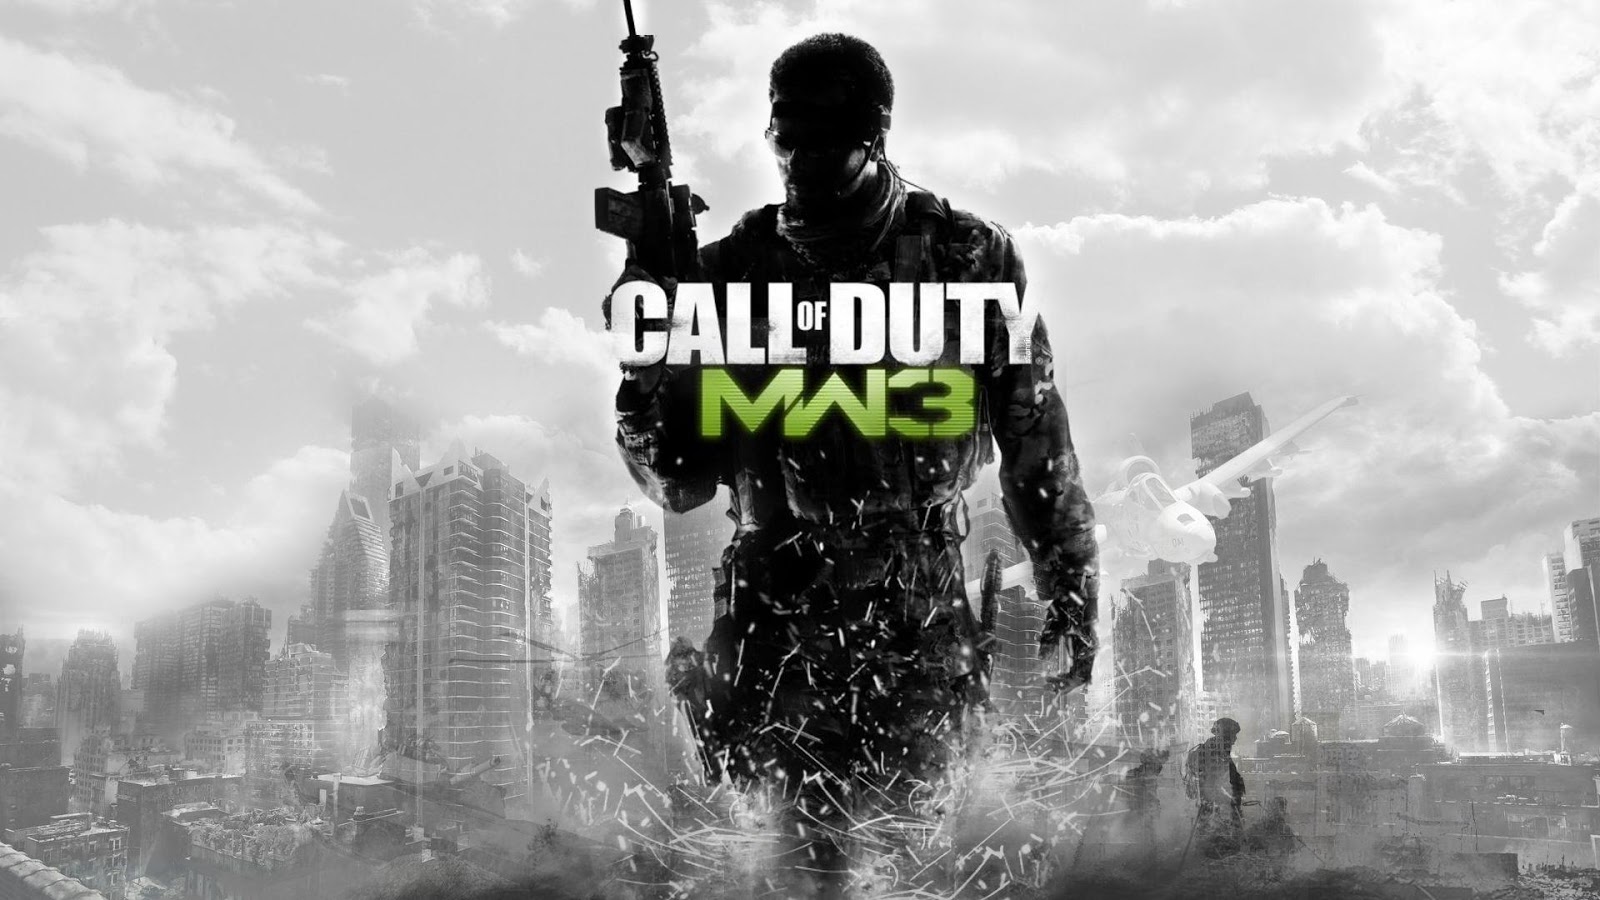 http://pcgamesforfreee.blogspot.in/2015/08/call-of-duty-series-download-call-of_9.html